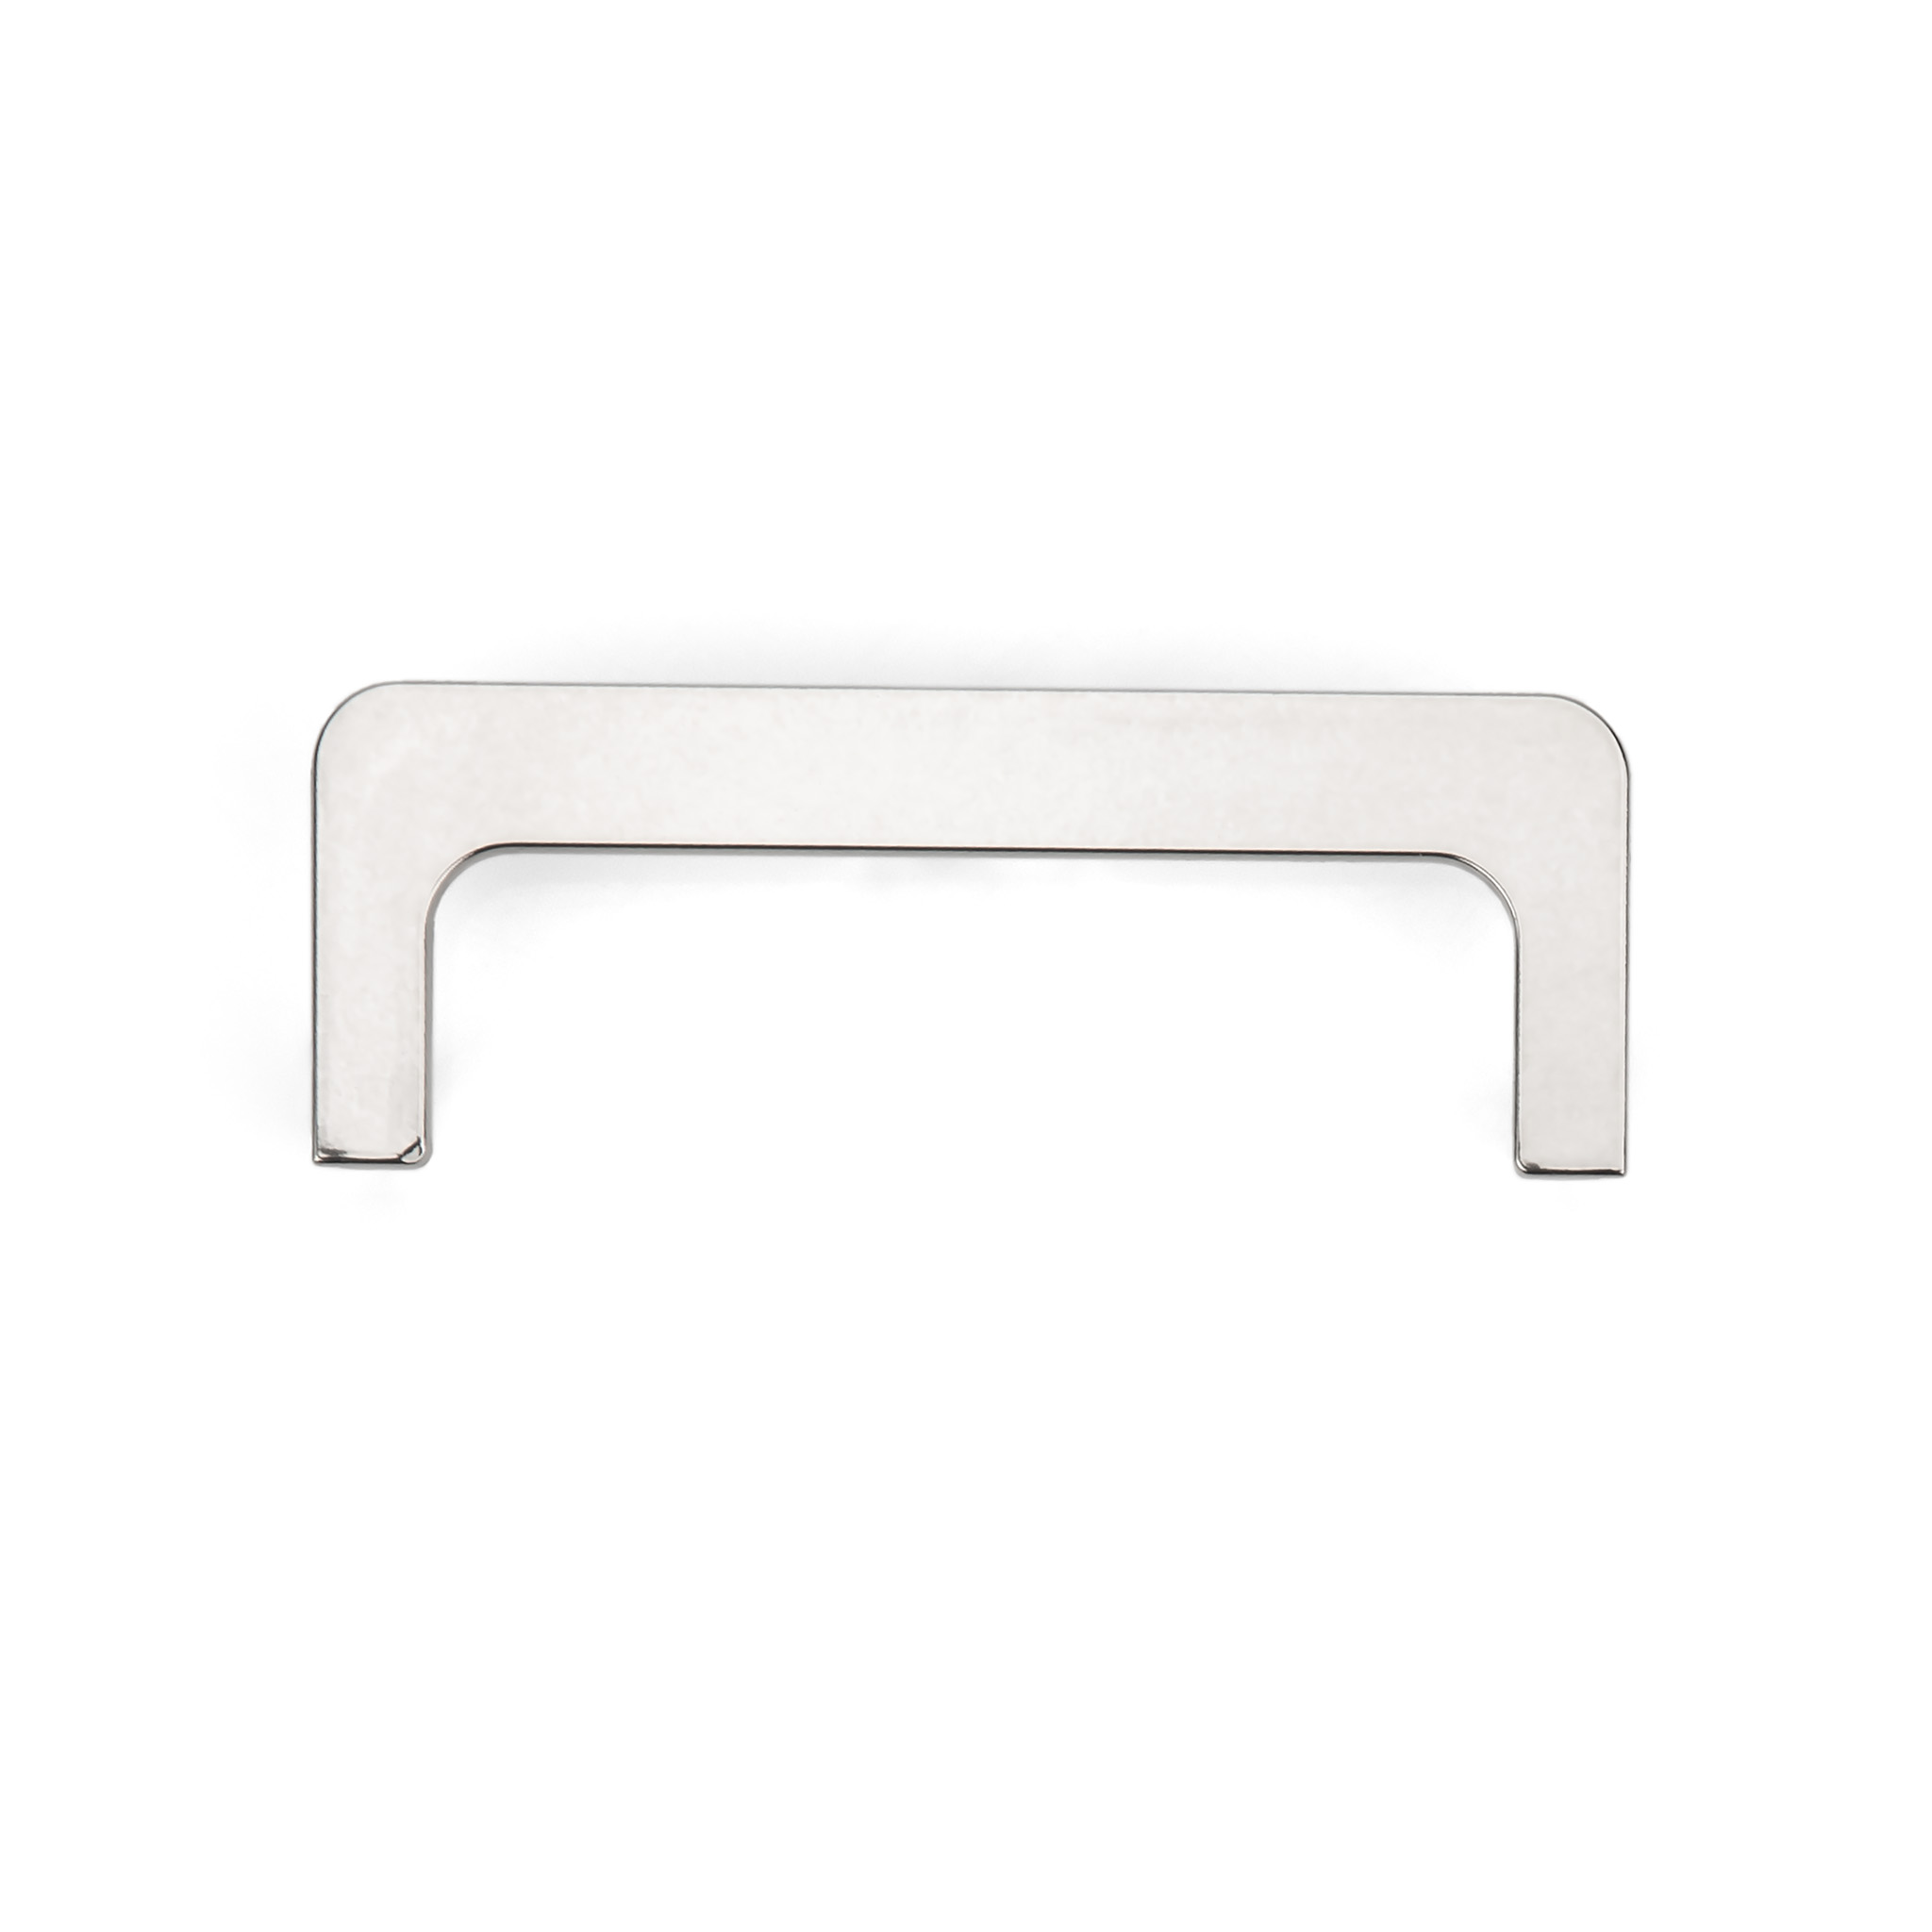 Laguna Open End Cap, for C-Shaped Profile, Universal, Stainless